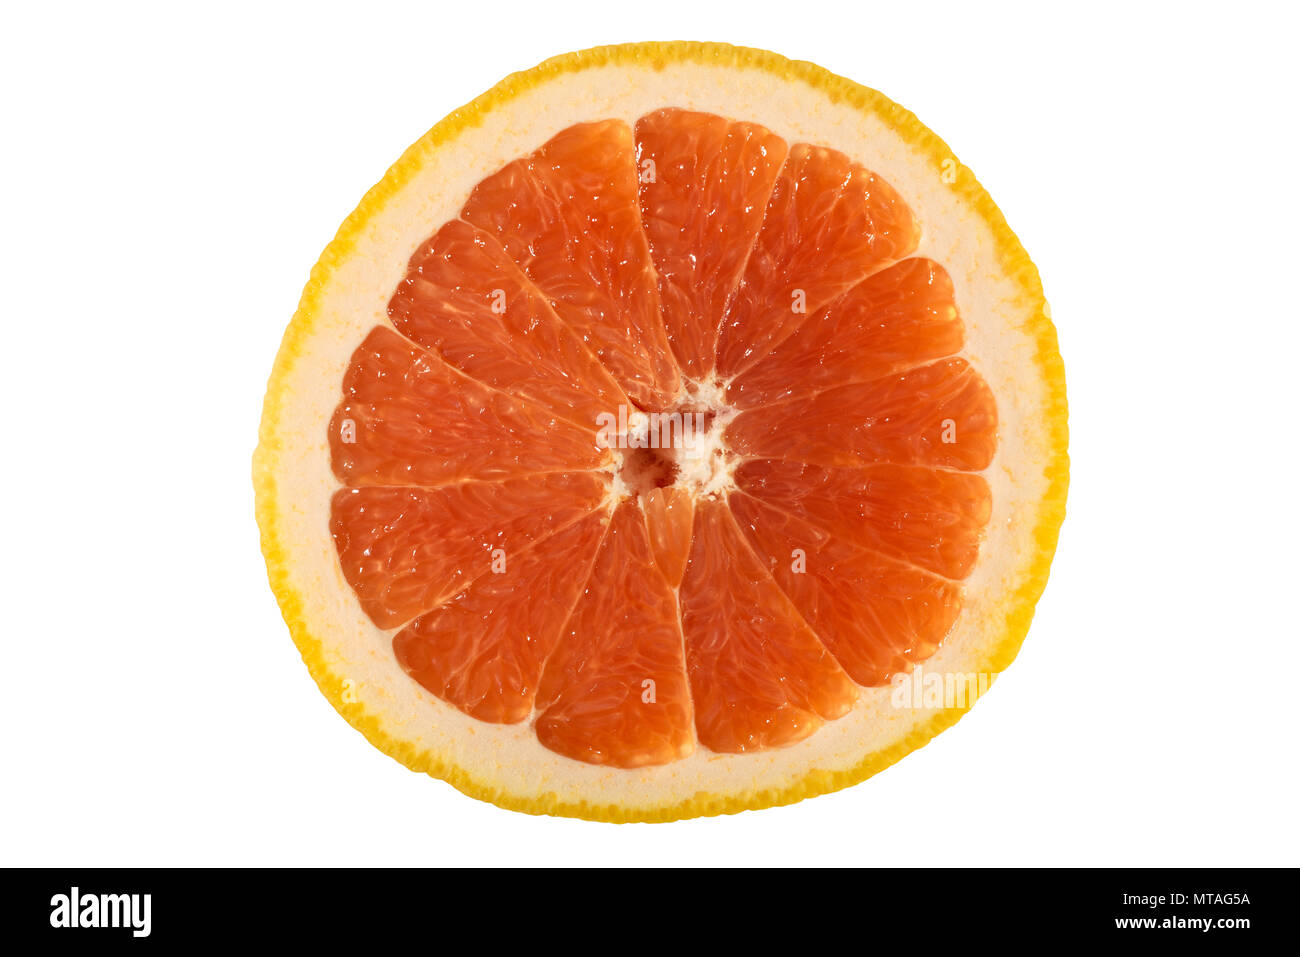 A photograph of a slice of grapefruit isolated on a white background. Stock Photo